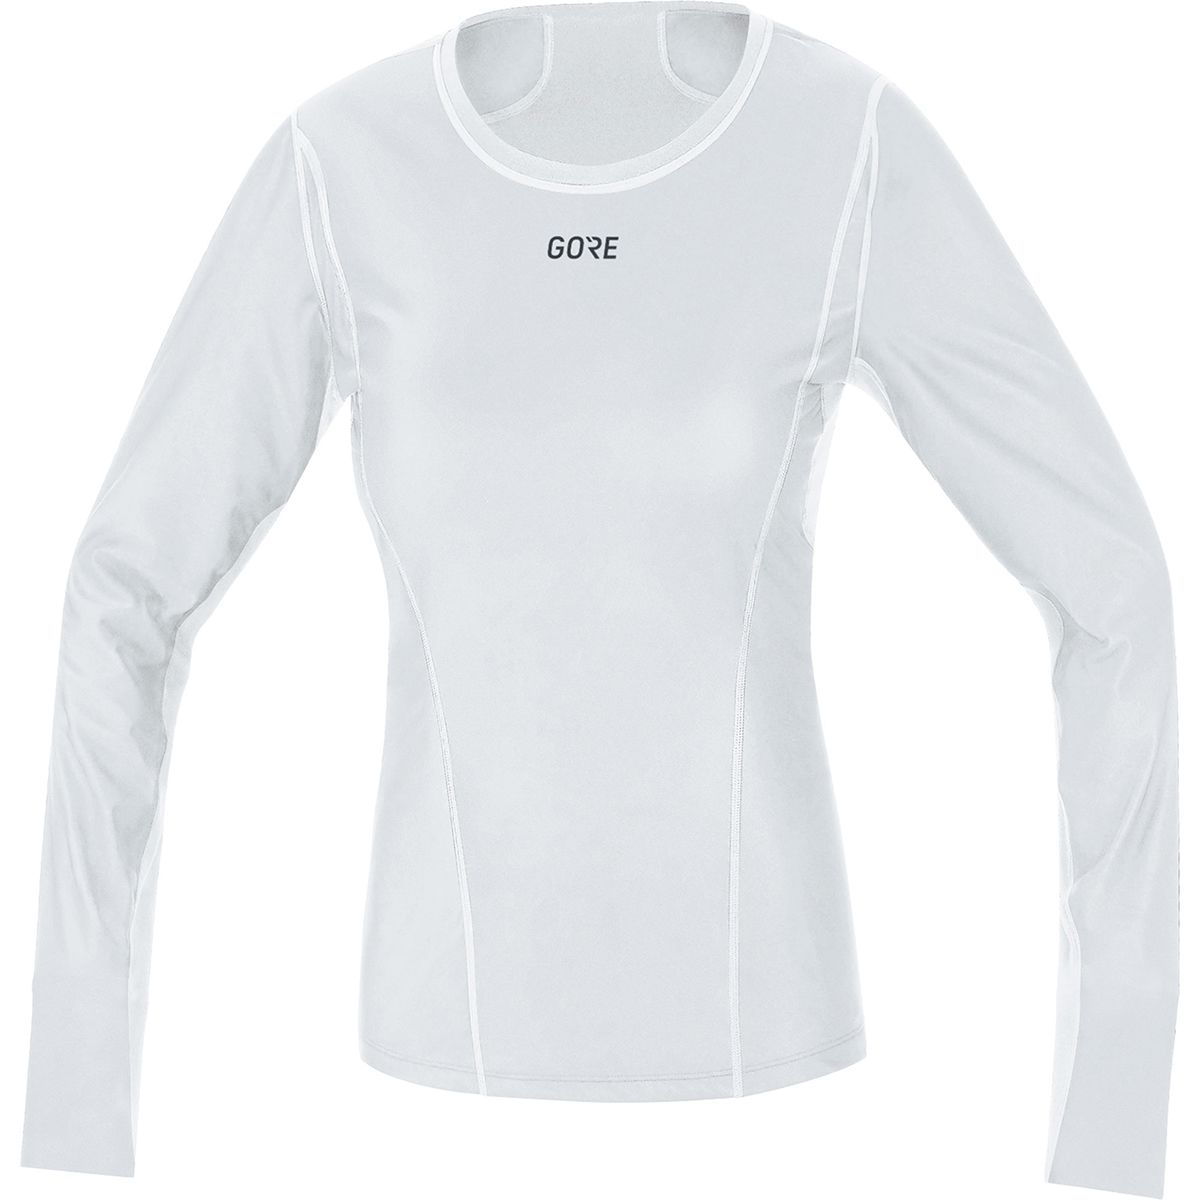 Windstopper Base Layer Thermo Long-Sleeve Shirt - Women